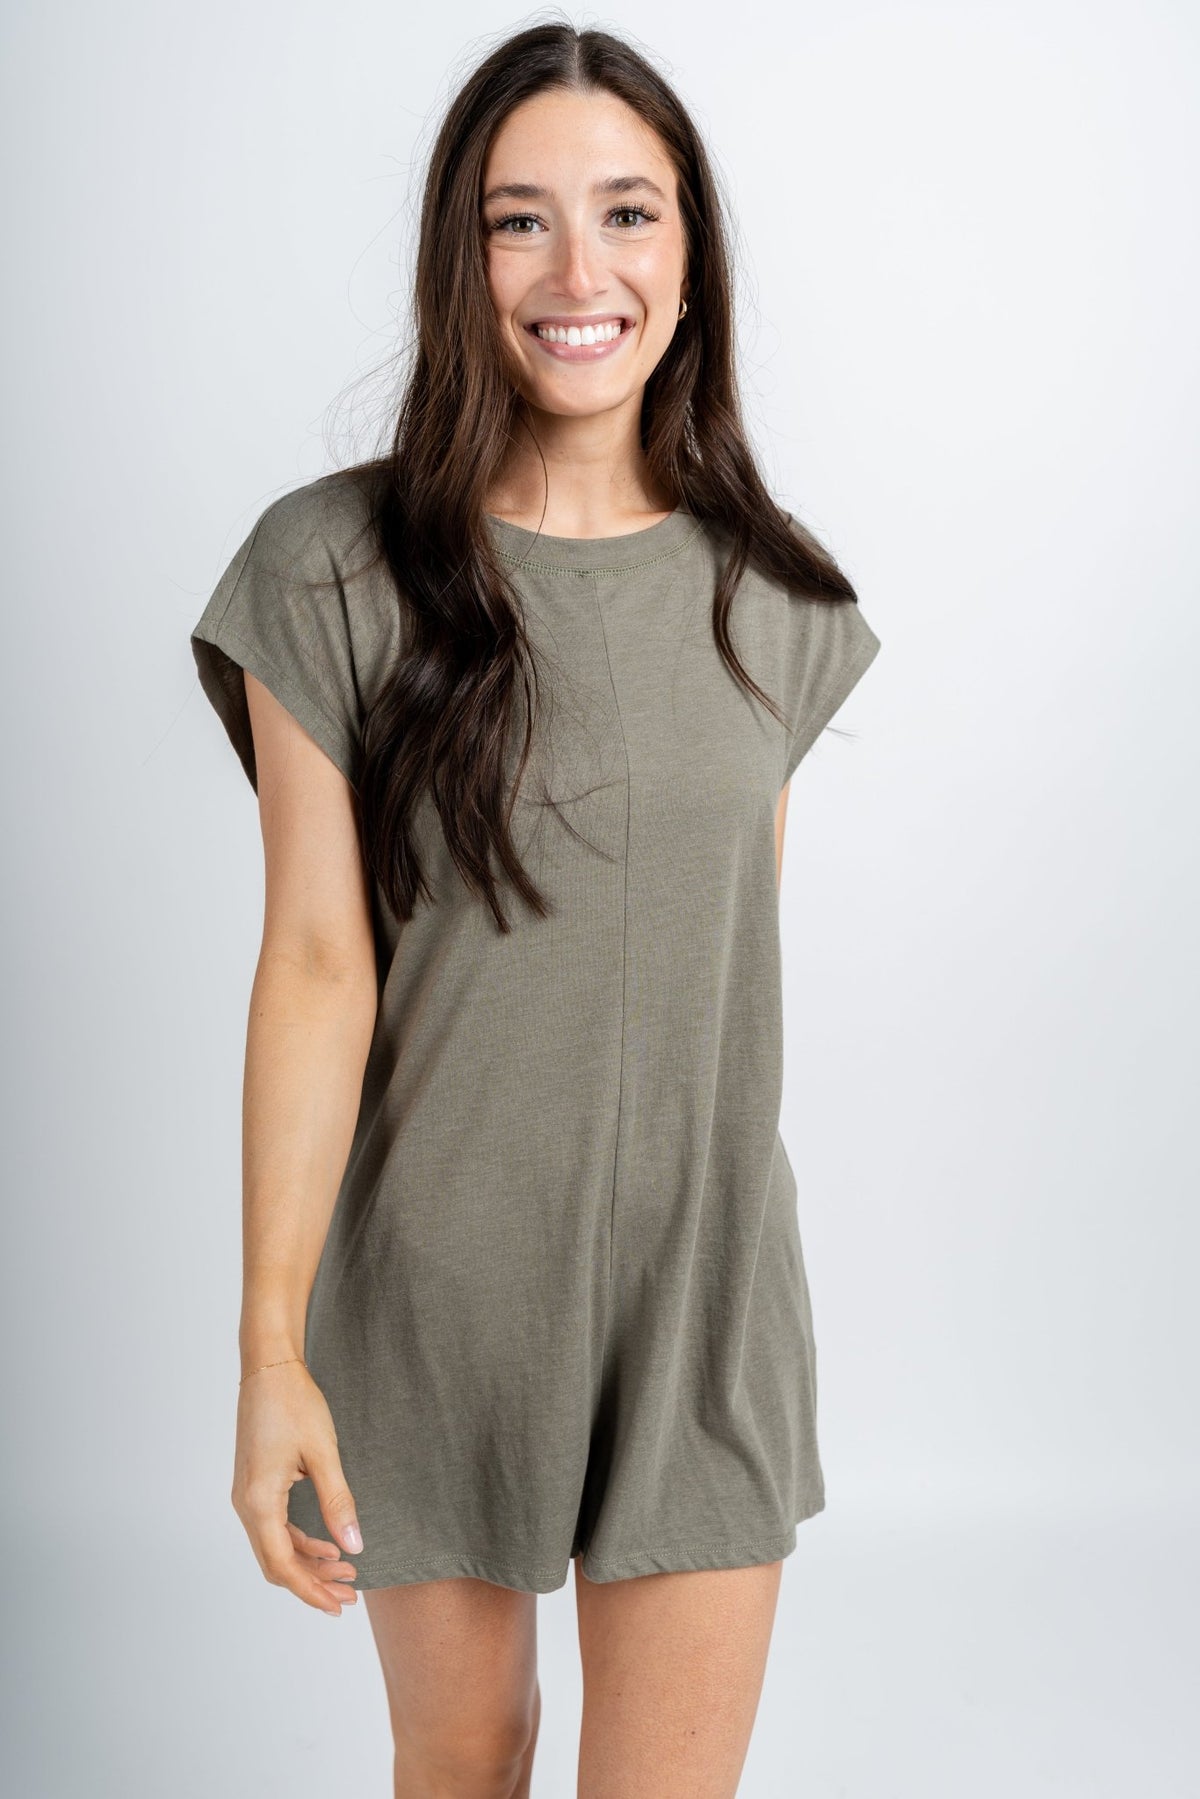 Z Supply Baja romper smoke sage - Z Supply romper - Z Supply Tops, Dresses, Tanks, Tees, Cardigans, Joggers and Loungewear at Lush Fashion Lounge